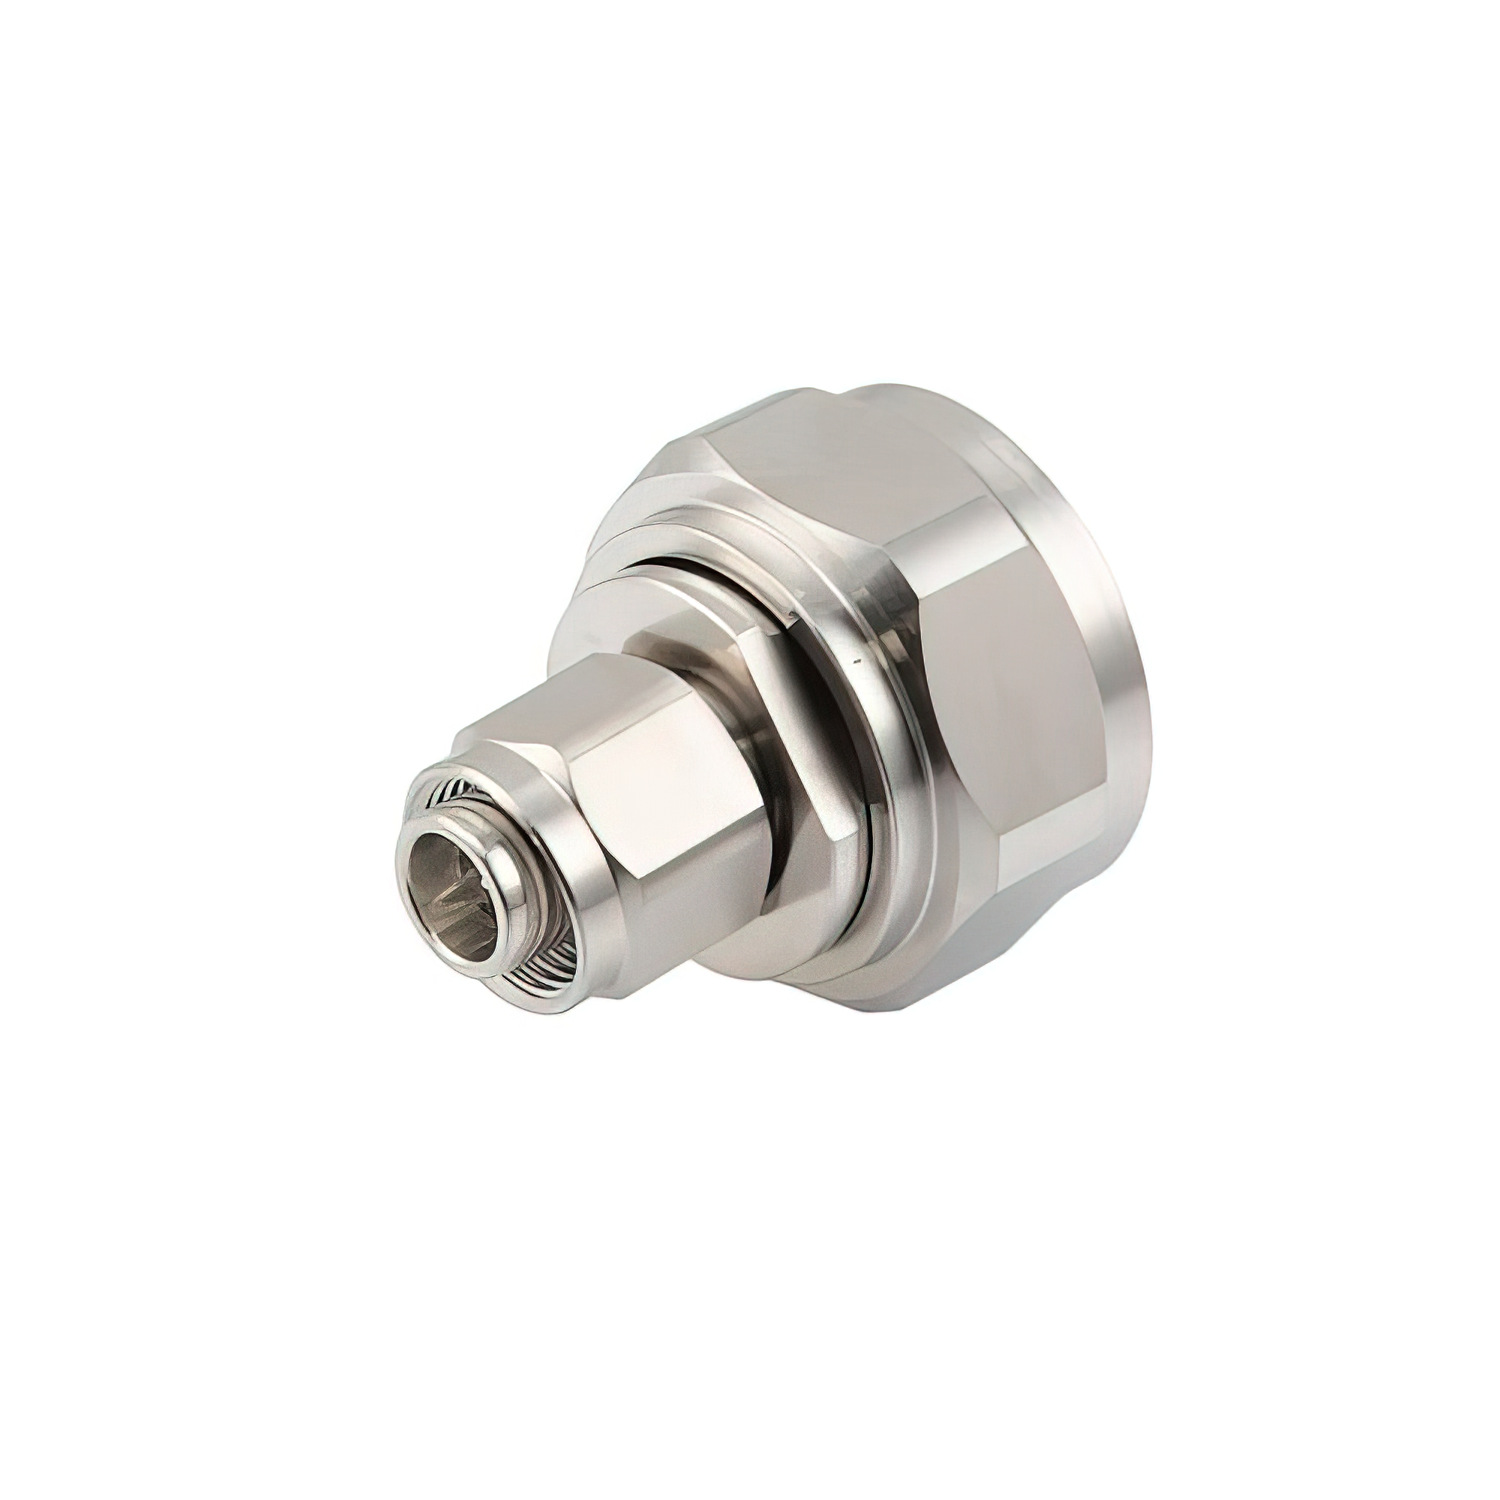 Low PIM 7-16 DIN Male to 2.2-5 Male Adapter 1